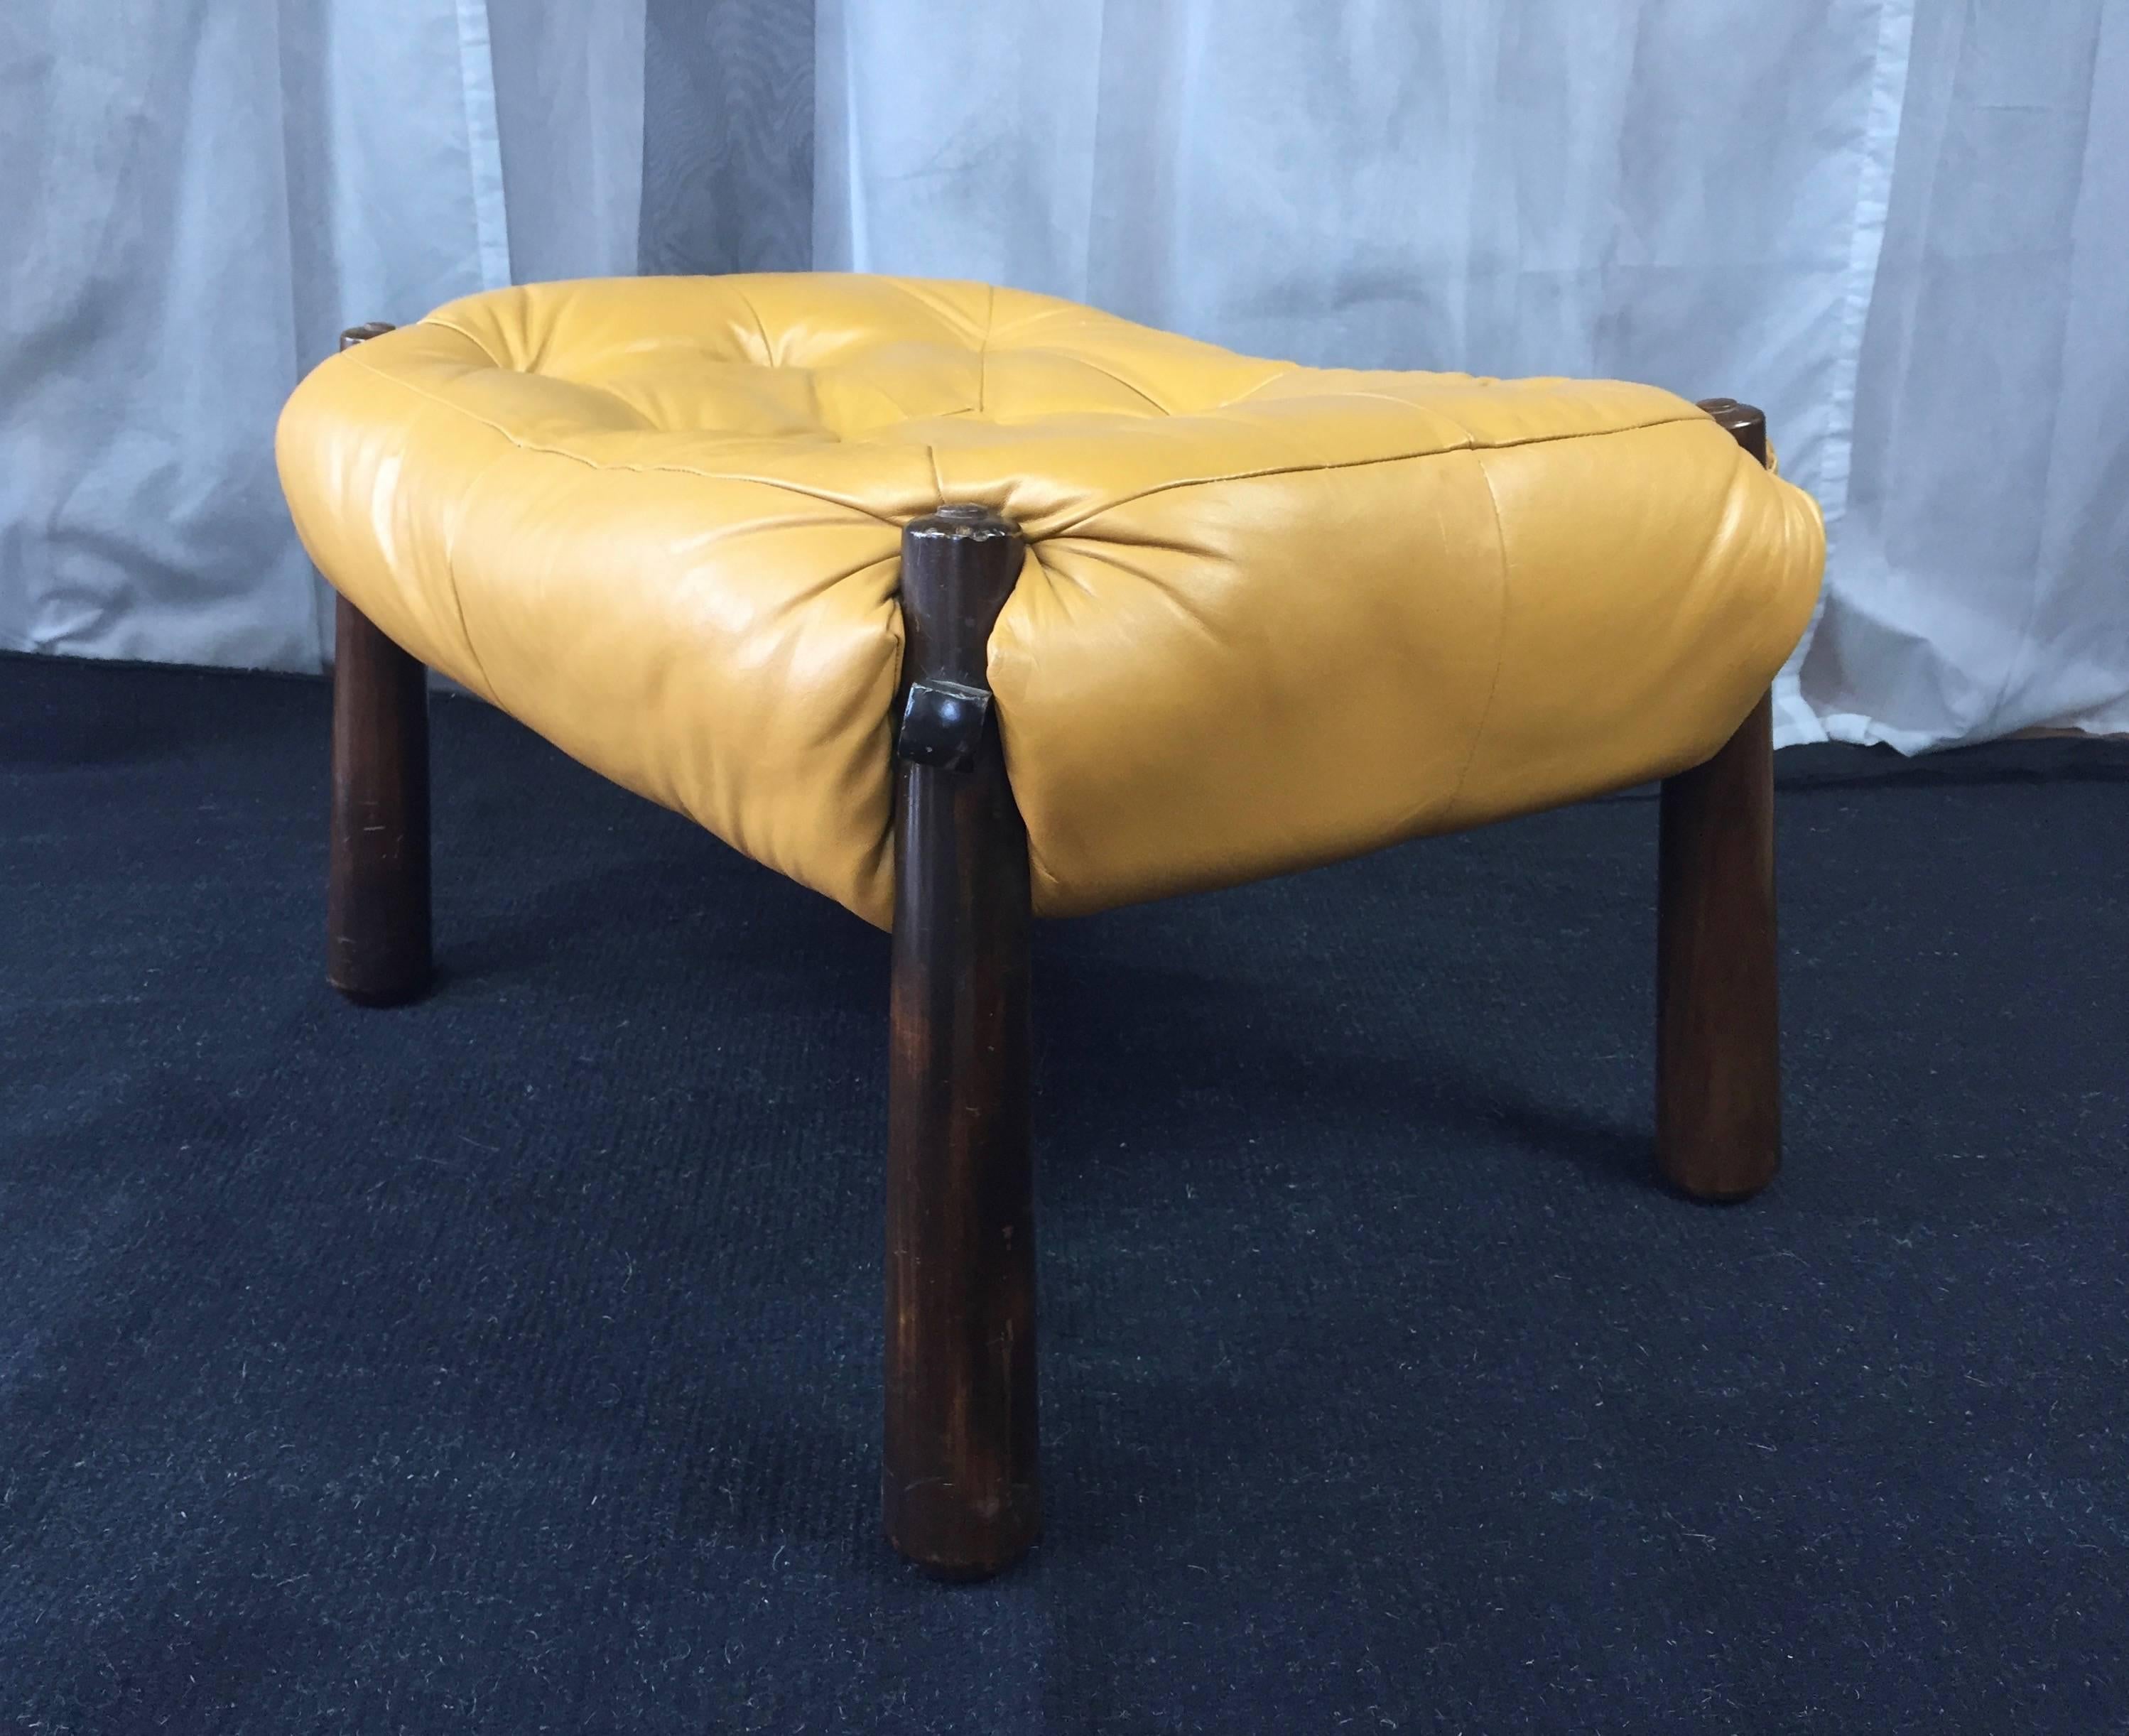 An inviting leather and Jacaranda ottoman by Percival Lafer for Lafer S.A. Ind. Com.

Comfortable over-stuffed top is upholstered in muted dijon tufted leather. Signature tapered club legs are burnt umber-stained jacaranda and feature an oversized